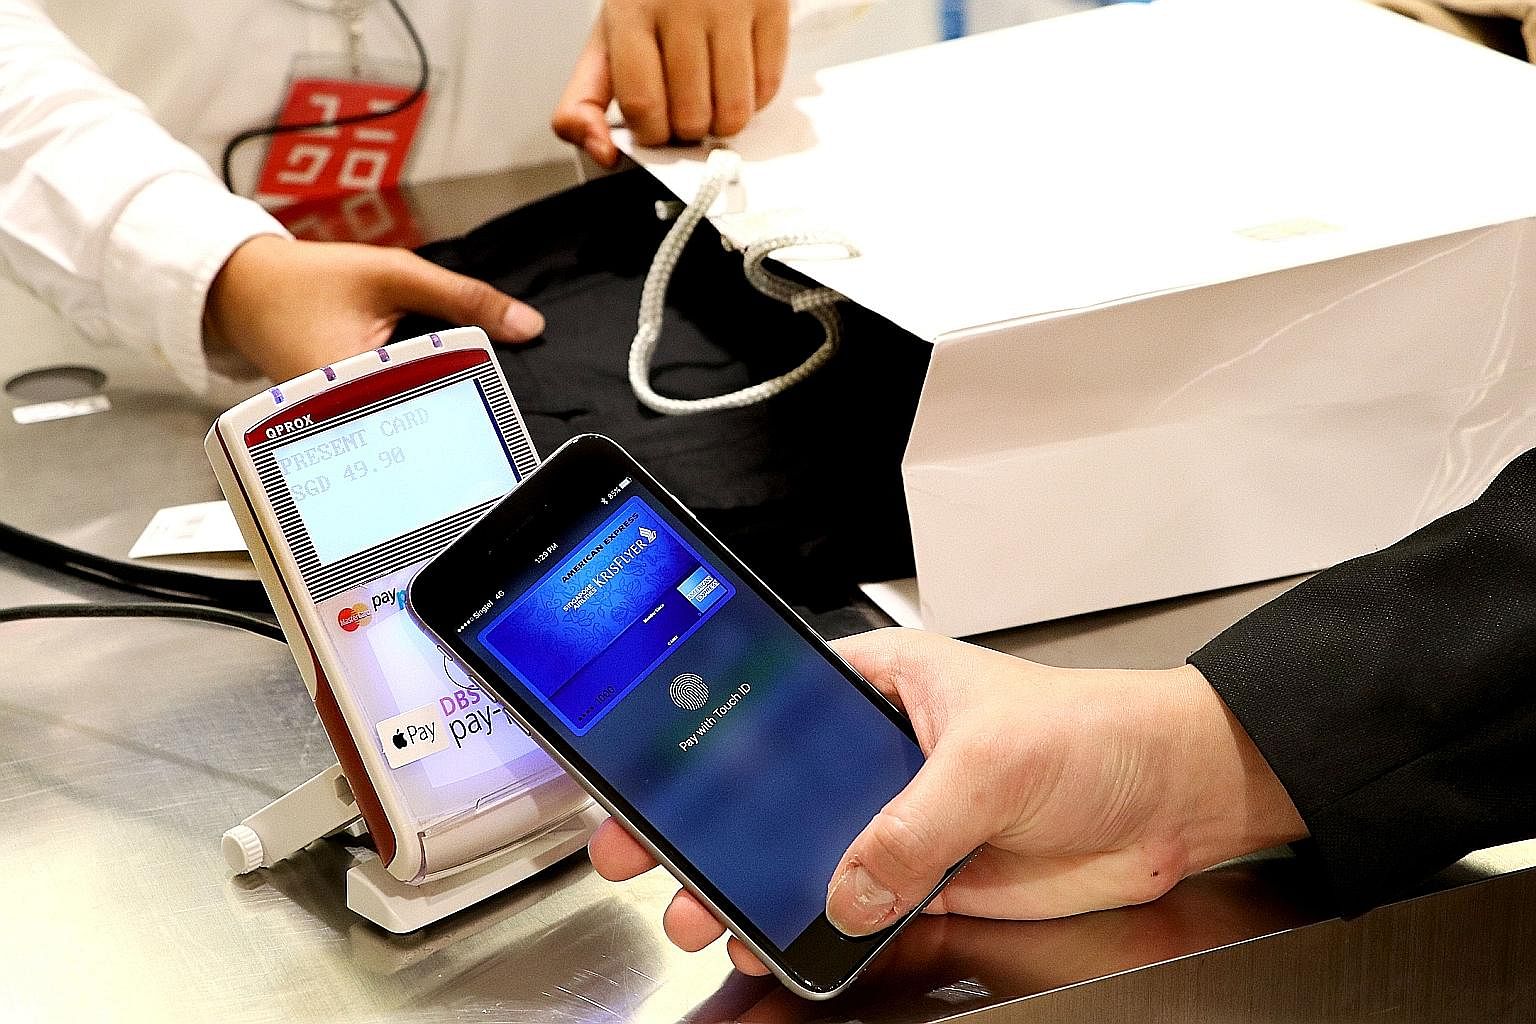 Other than at Uniqlo, iPhone users can use Apple Pay to make their purchases at Starbucks and FairPrice supermarkets.